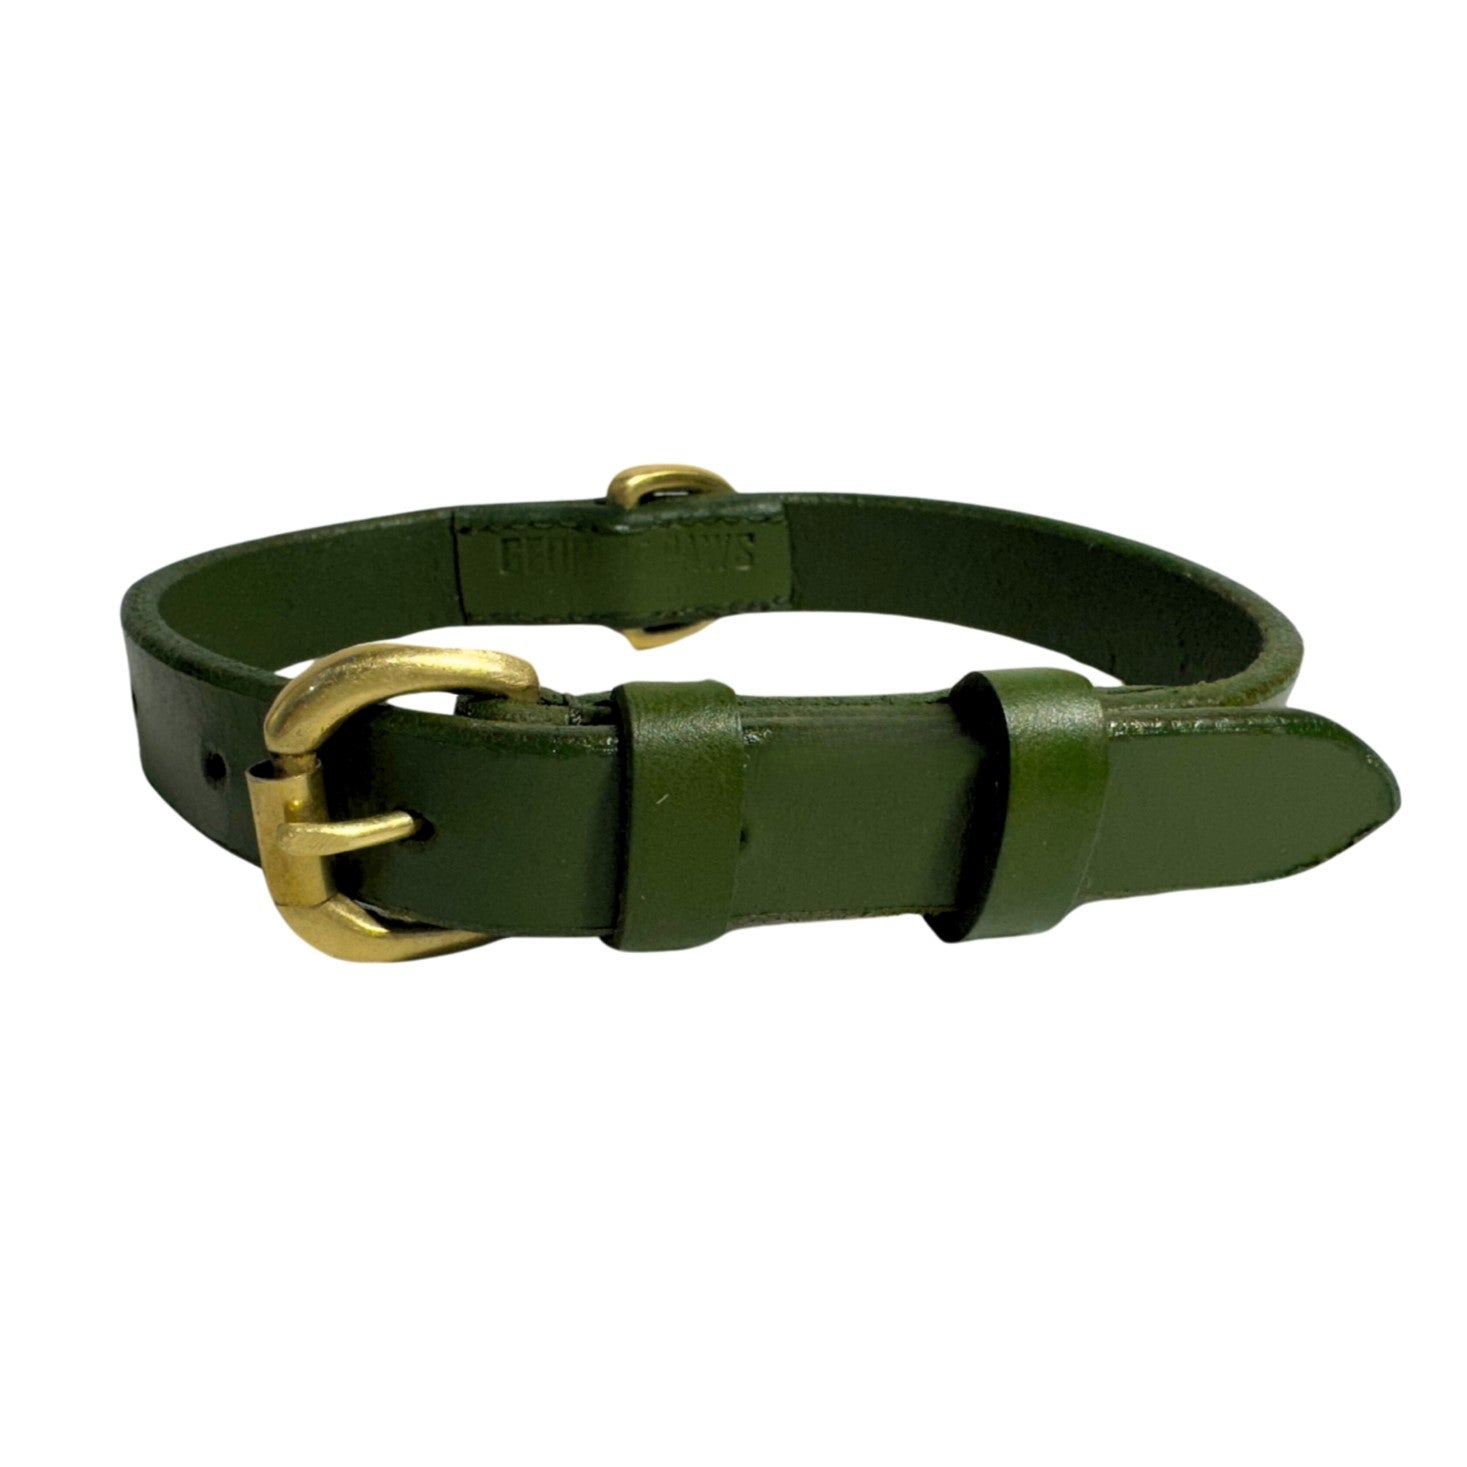 A stylish green Georgie Paws buffalo leather Bald Collar Chive with a golden buckle and a loop, isolated on a white background. The collar has visible stitching and a solid, streamlined design.